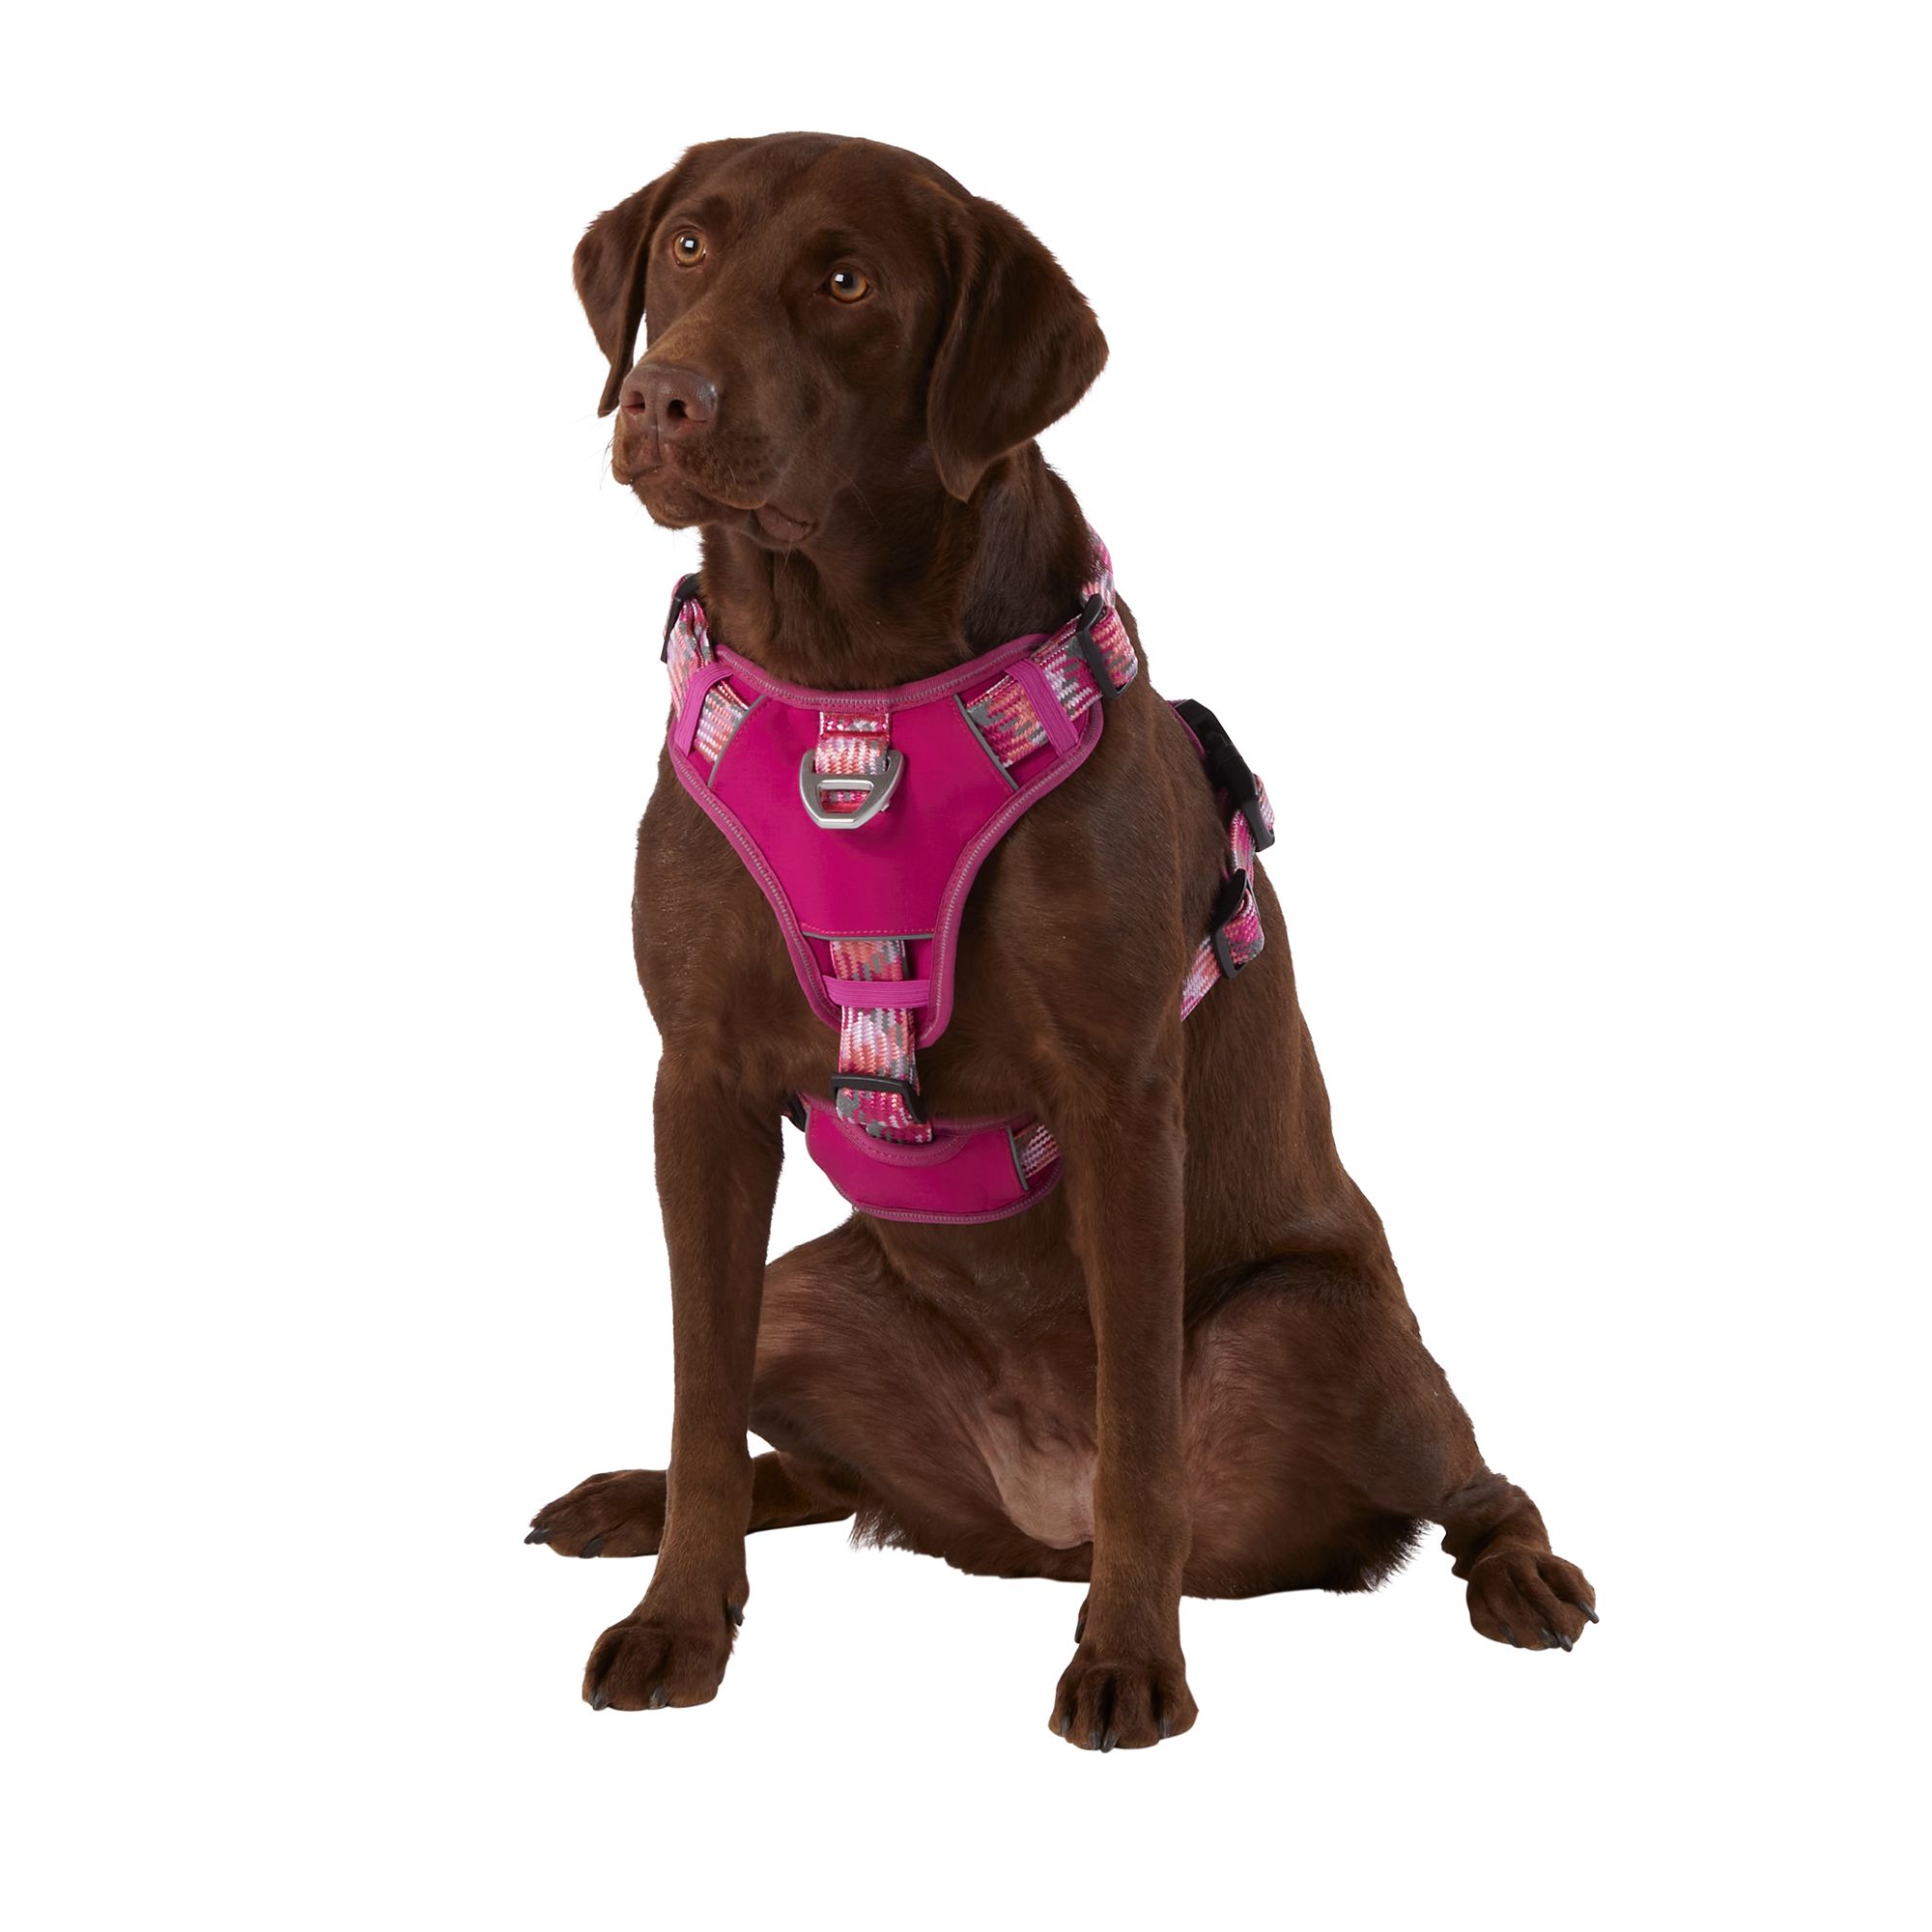 Official Miami Heat Pet Gear, Collars, Leashes, Pet Toys